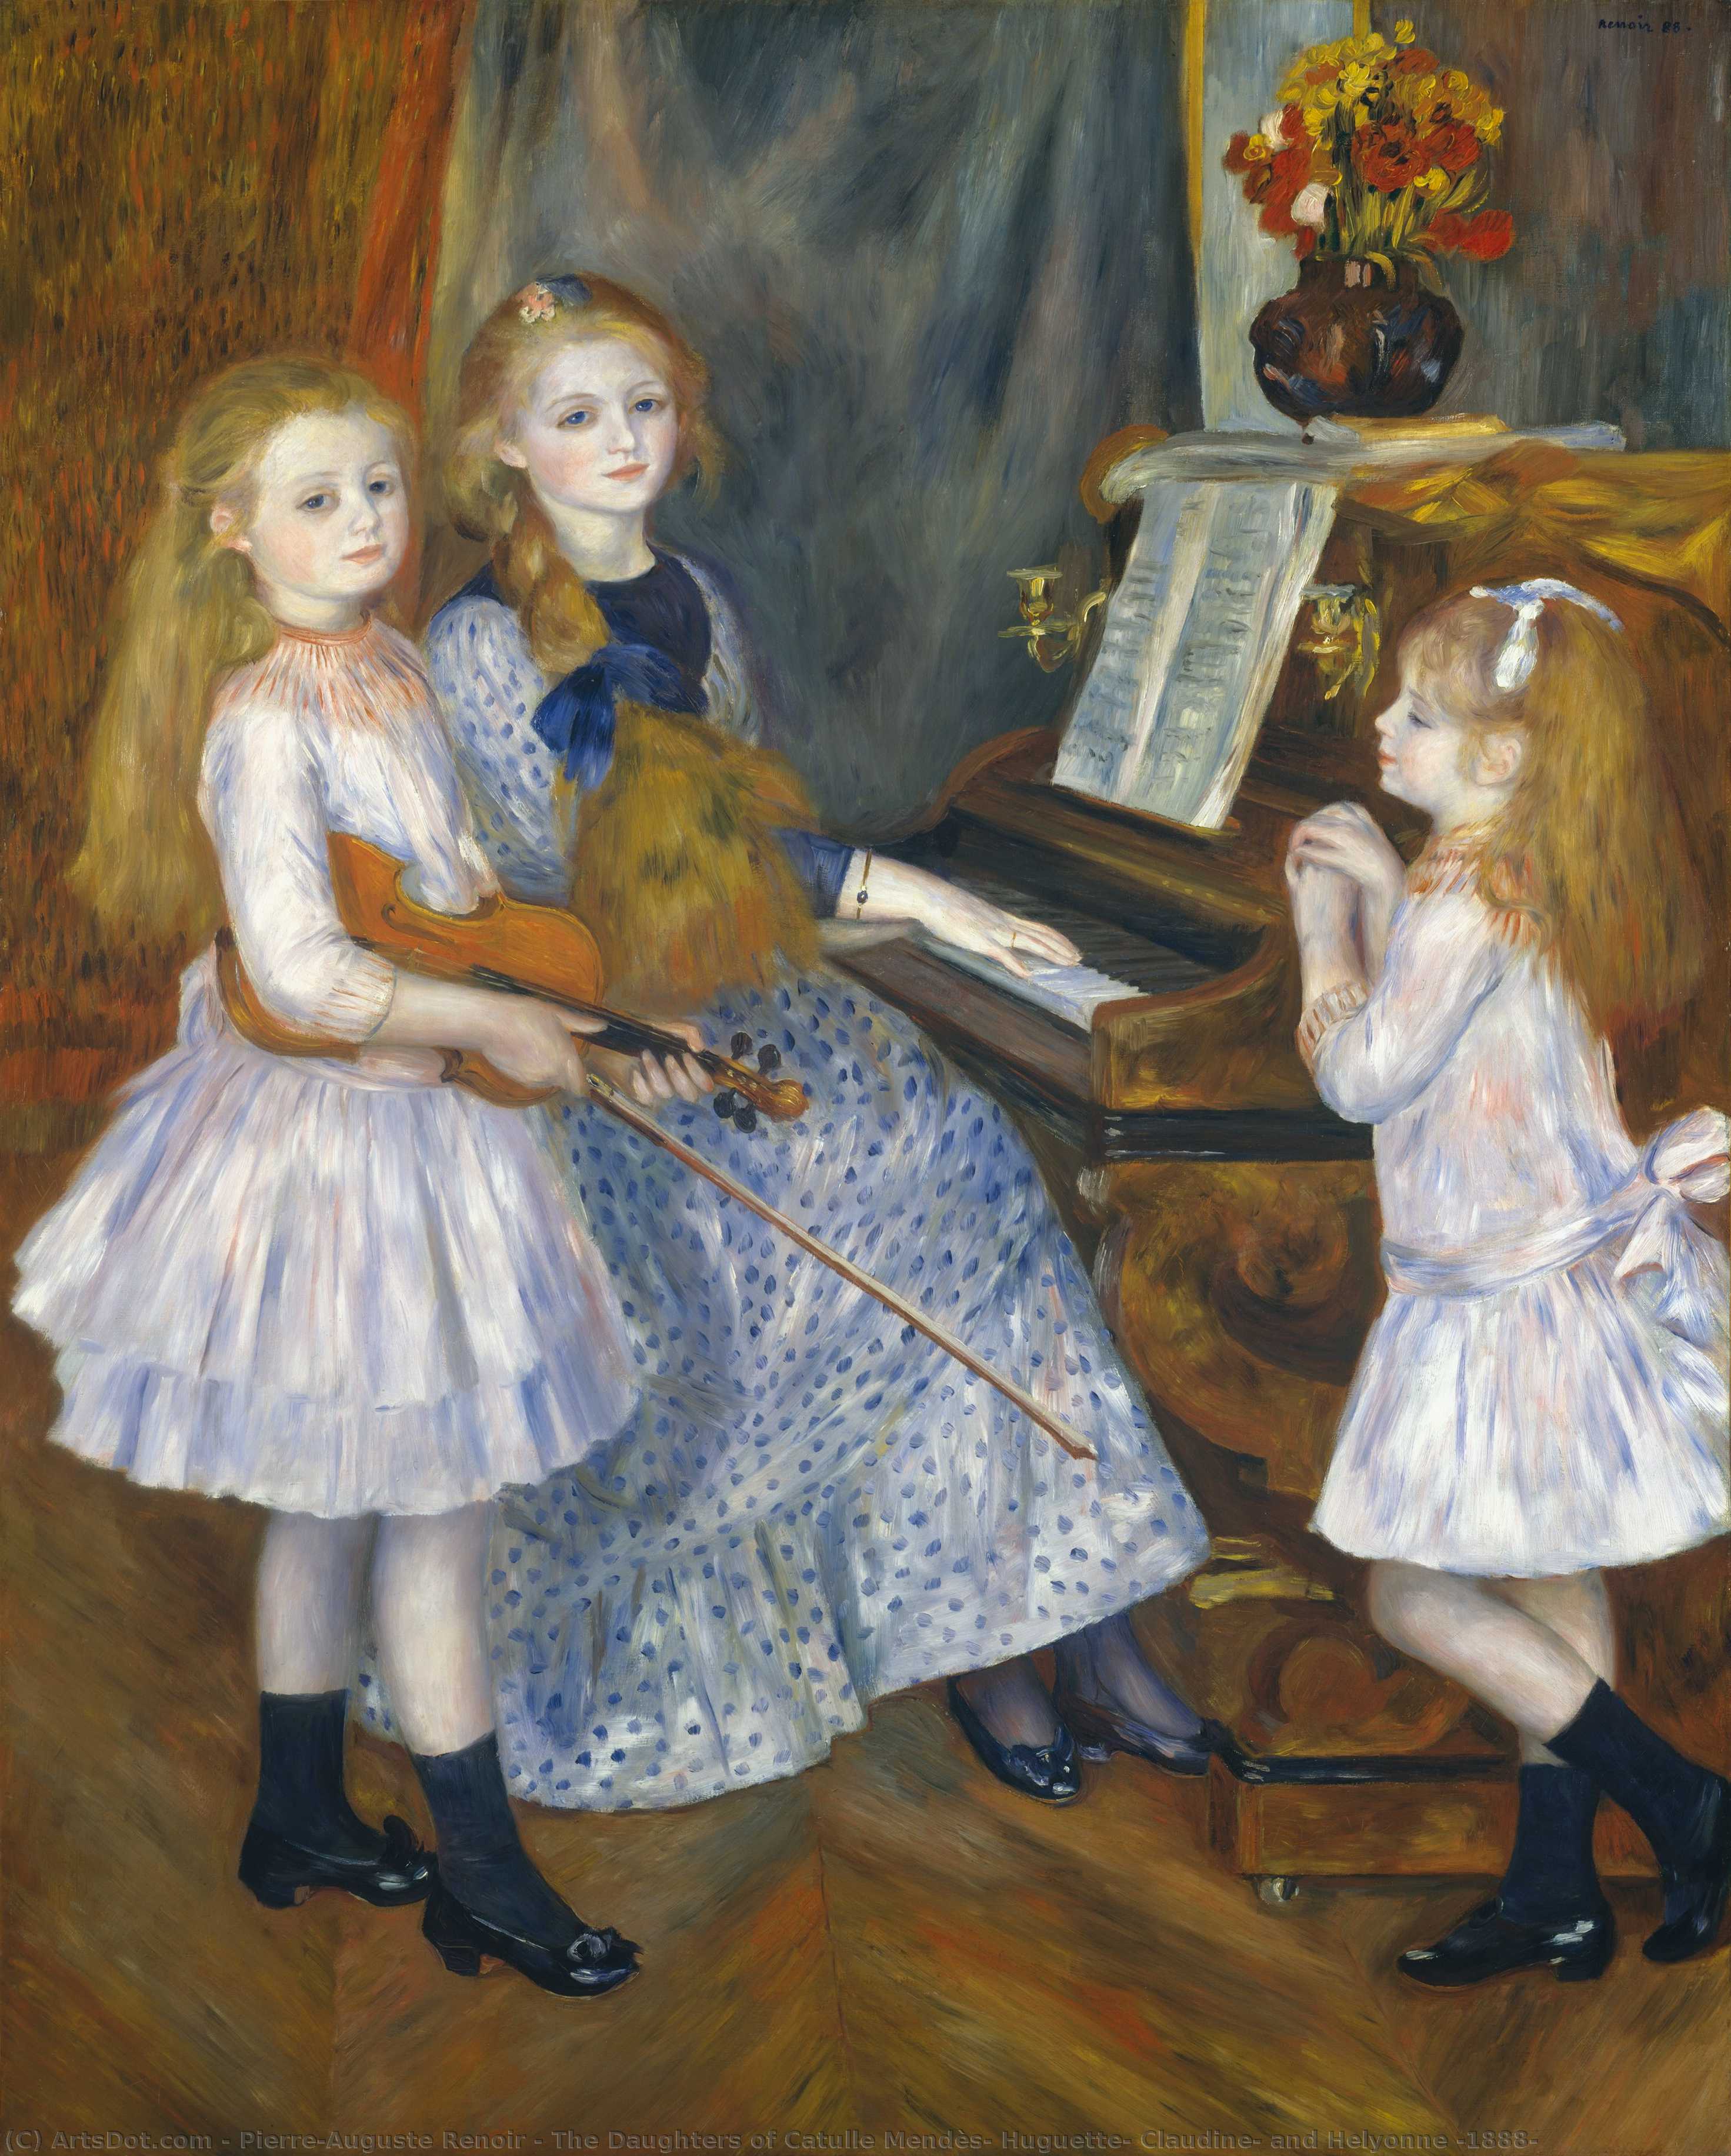 Order Art Reproductions The Daughters of Catulle Mendès, Huguette, Claudine, and Helyonne (1888) by Pierre-Auguste Renoir (1841-1919, France) | ArtsDot.com